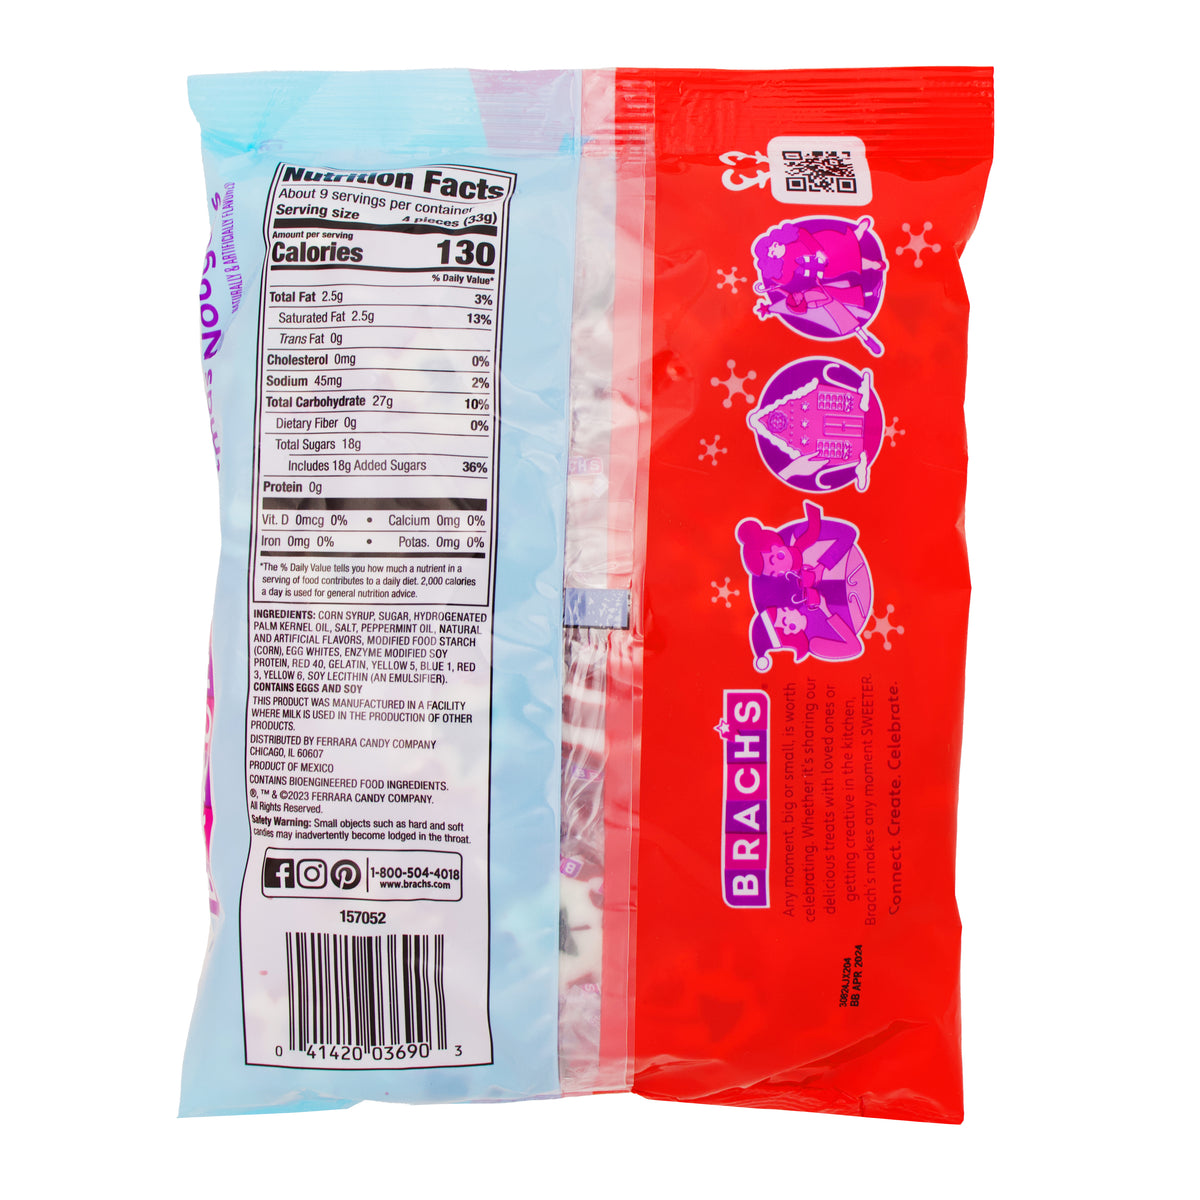 Christmas Brach's Peppermint Christmas Nougat - 11oz Nutrition Facts Ingredients - Brach's Peppermint Nougat - Christmas Candy Delights - Festive Nougat Treats - Holiday Confections - Peppermint Flavoured Sweets - Seasonal Candy Joy